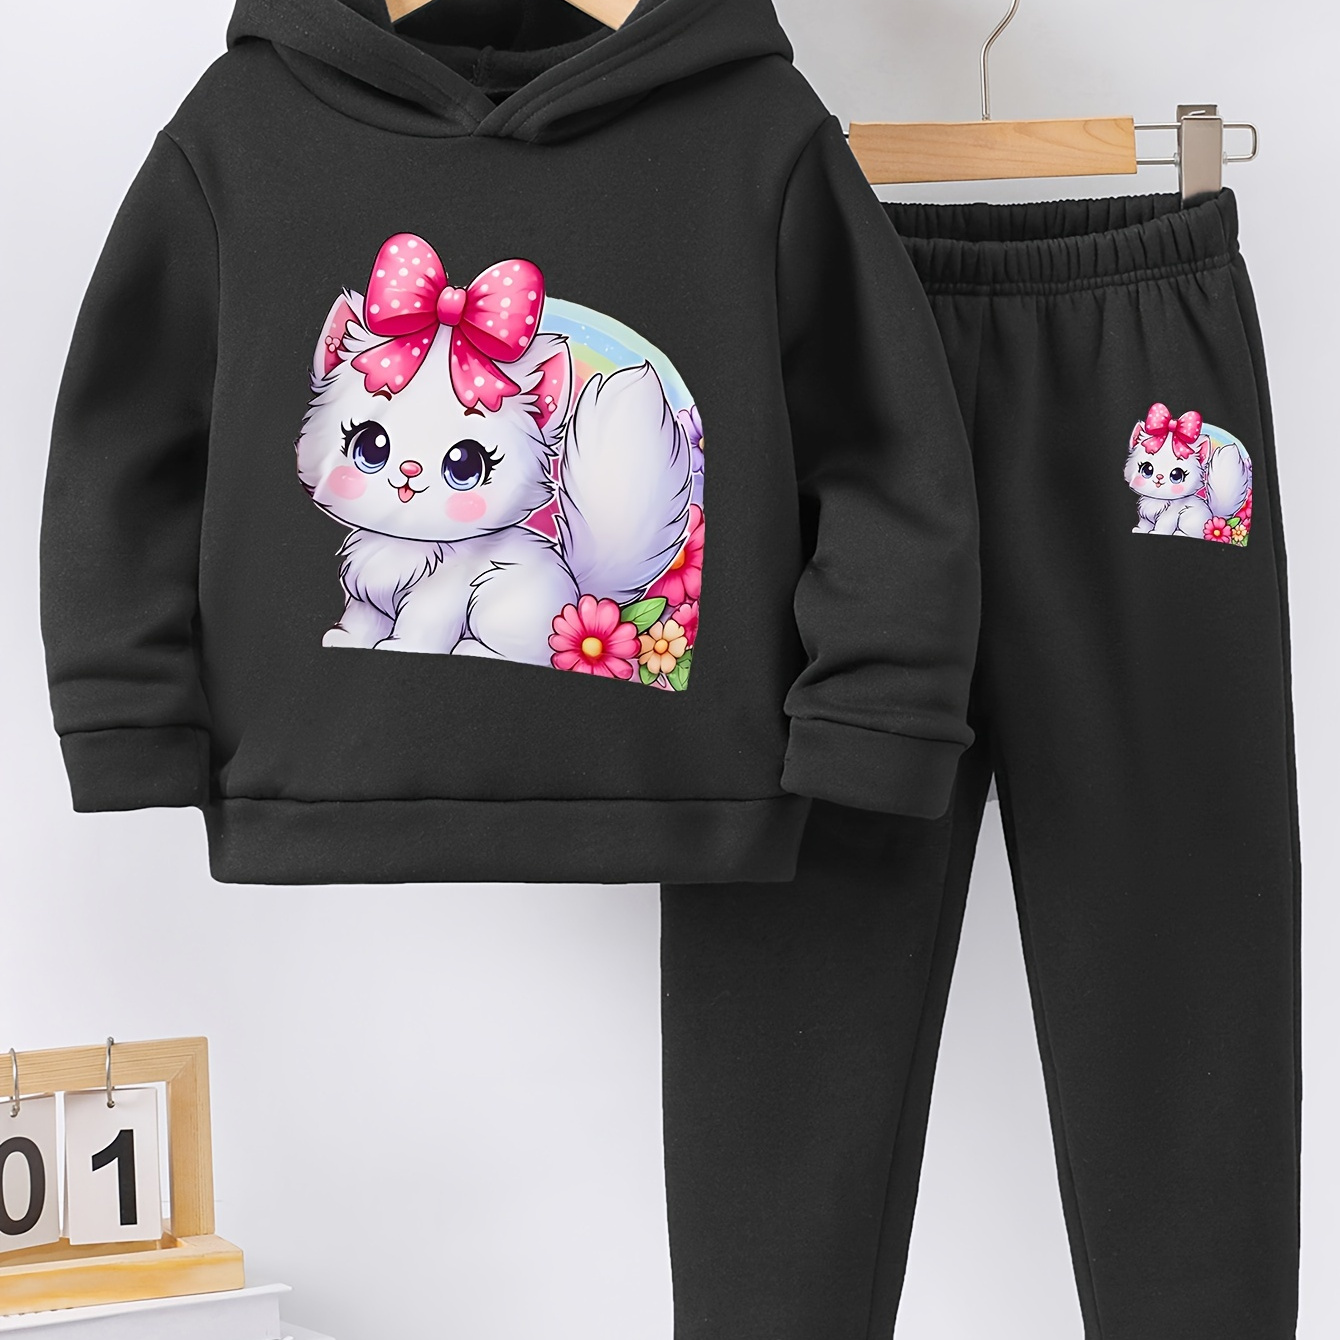 

Girl's Winter Hoodie And Leggings Set: Soft Fleece, Pink Bow, And Cute Kitty Design